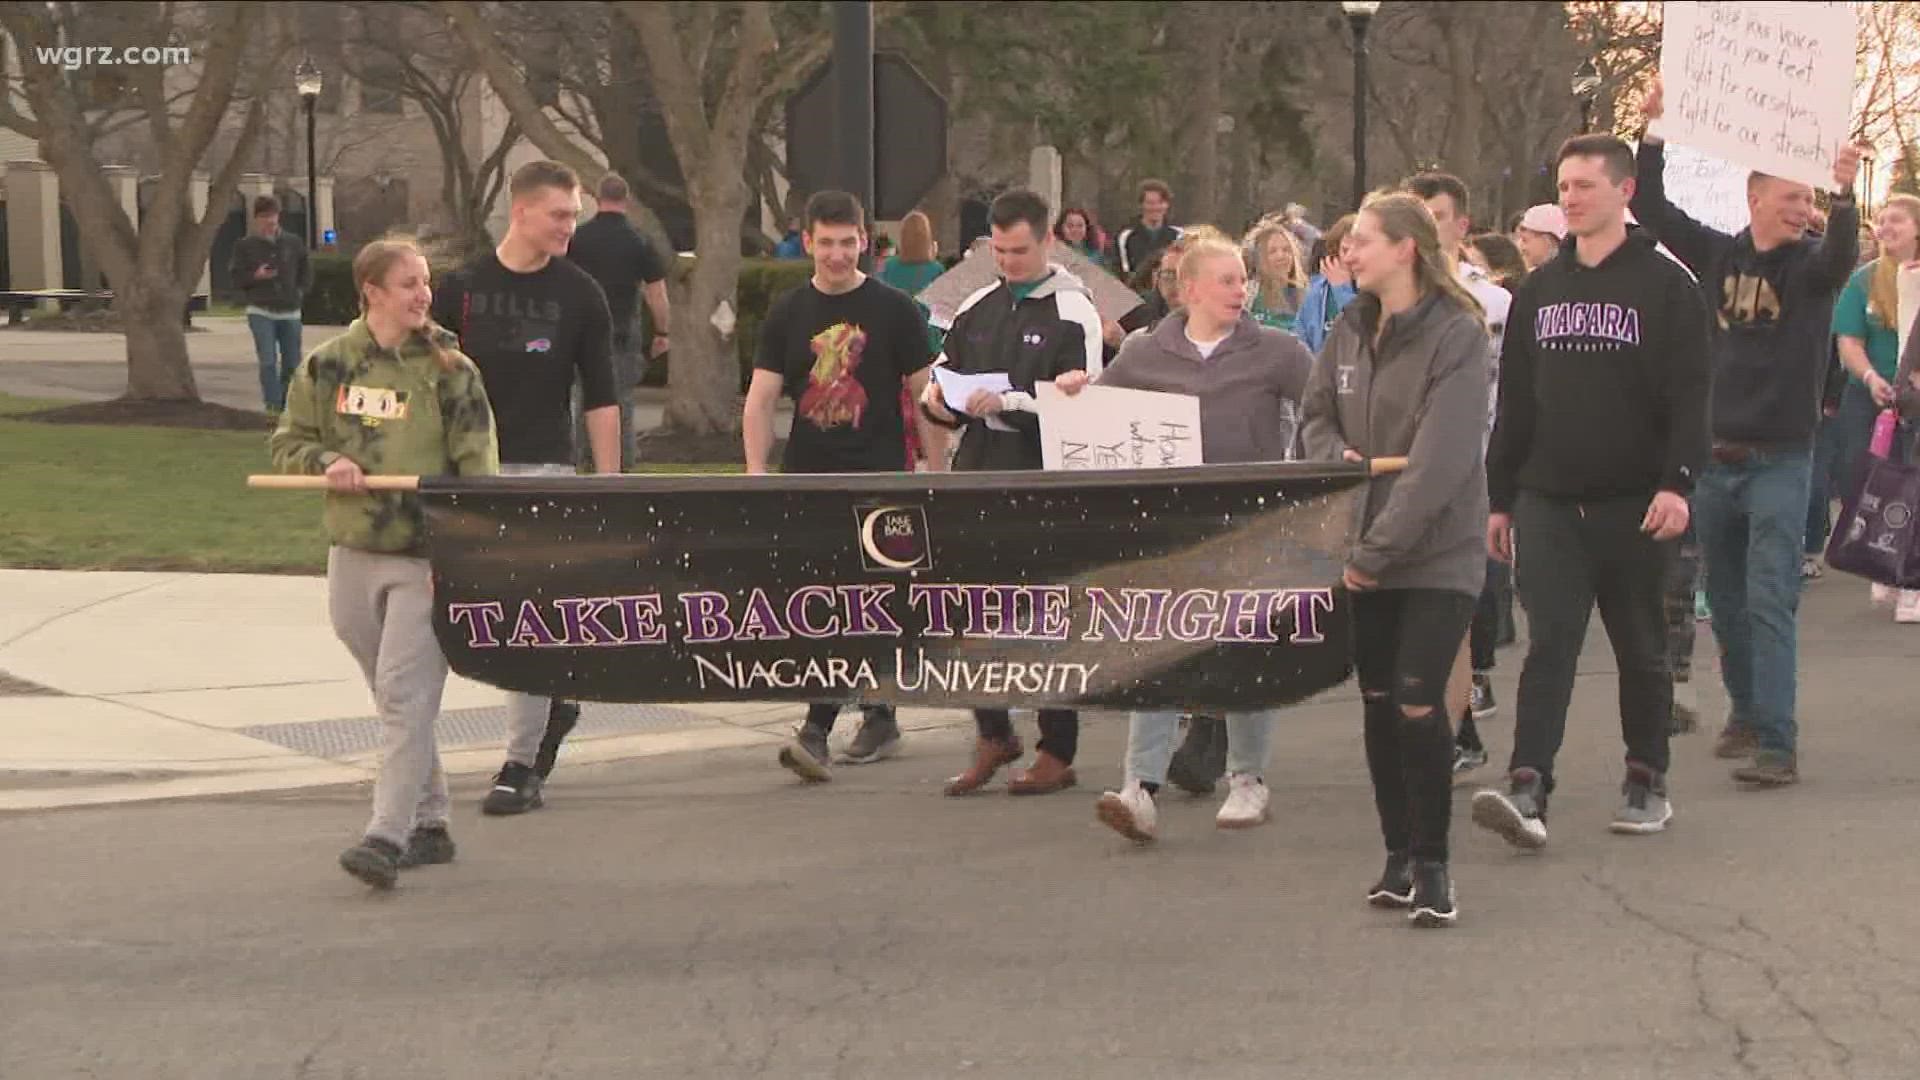 Through song, a candle light vigil, and a march across campus. Niagara University says it's standing with victims of abuse.